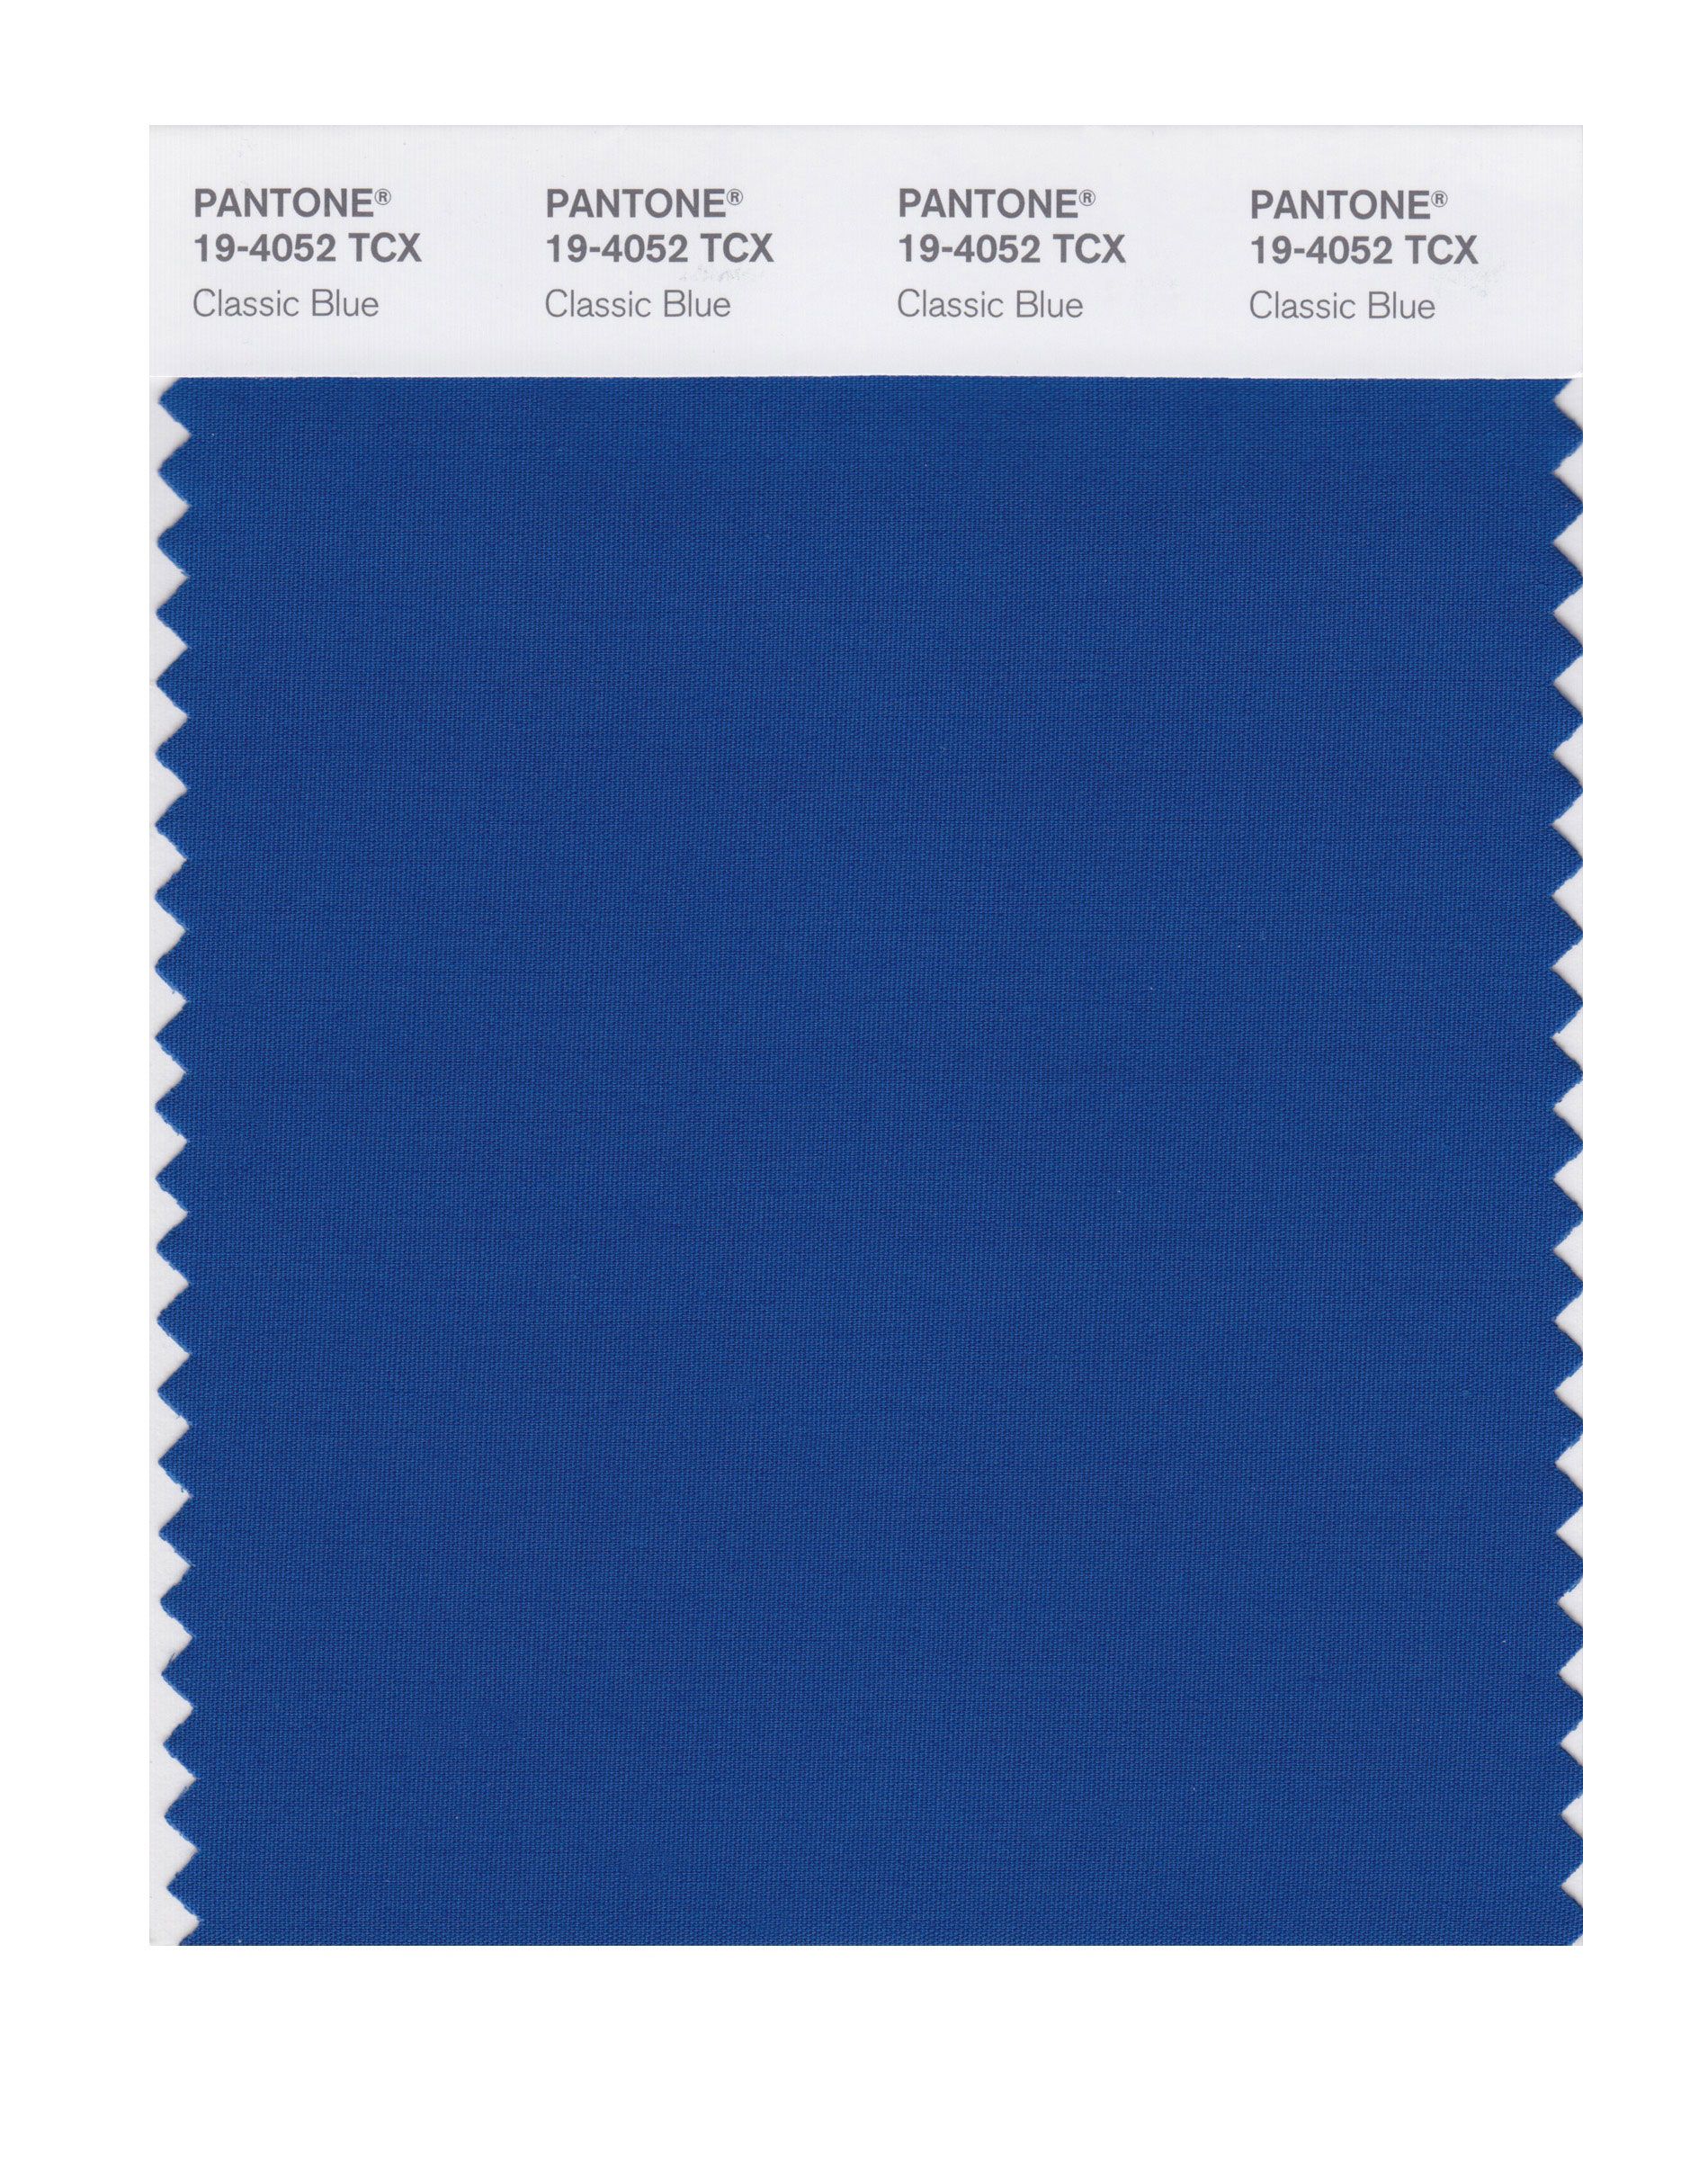 Pantone's 2020 Color of the Year Should Bode Well for Denim